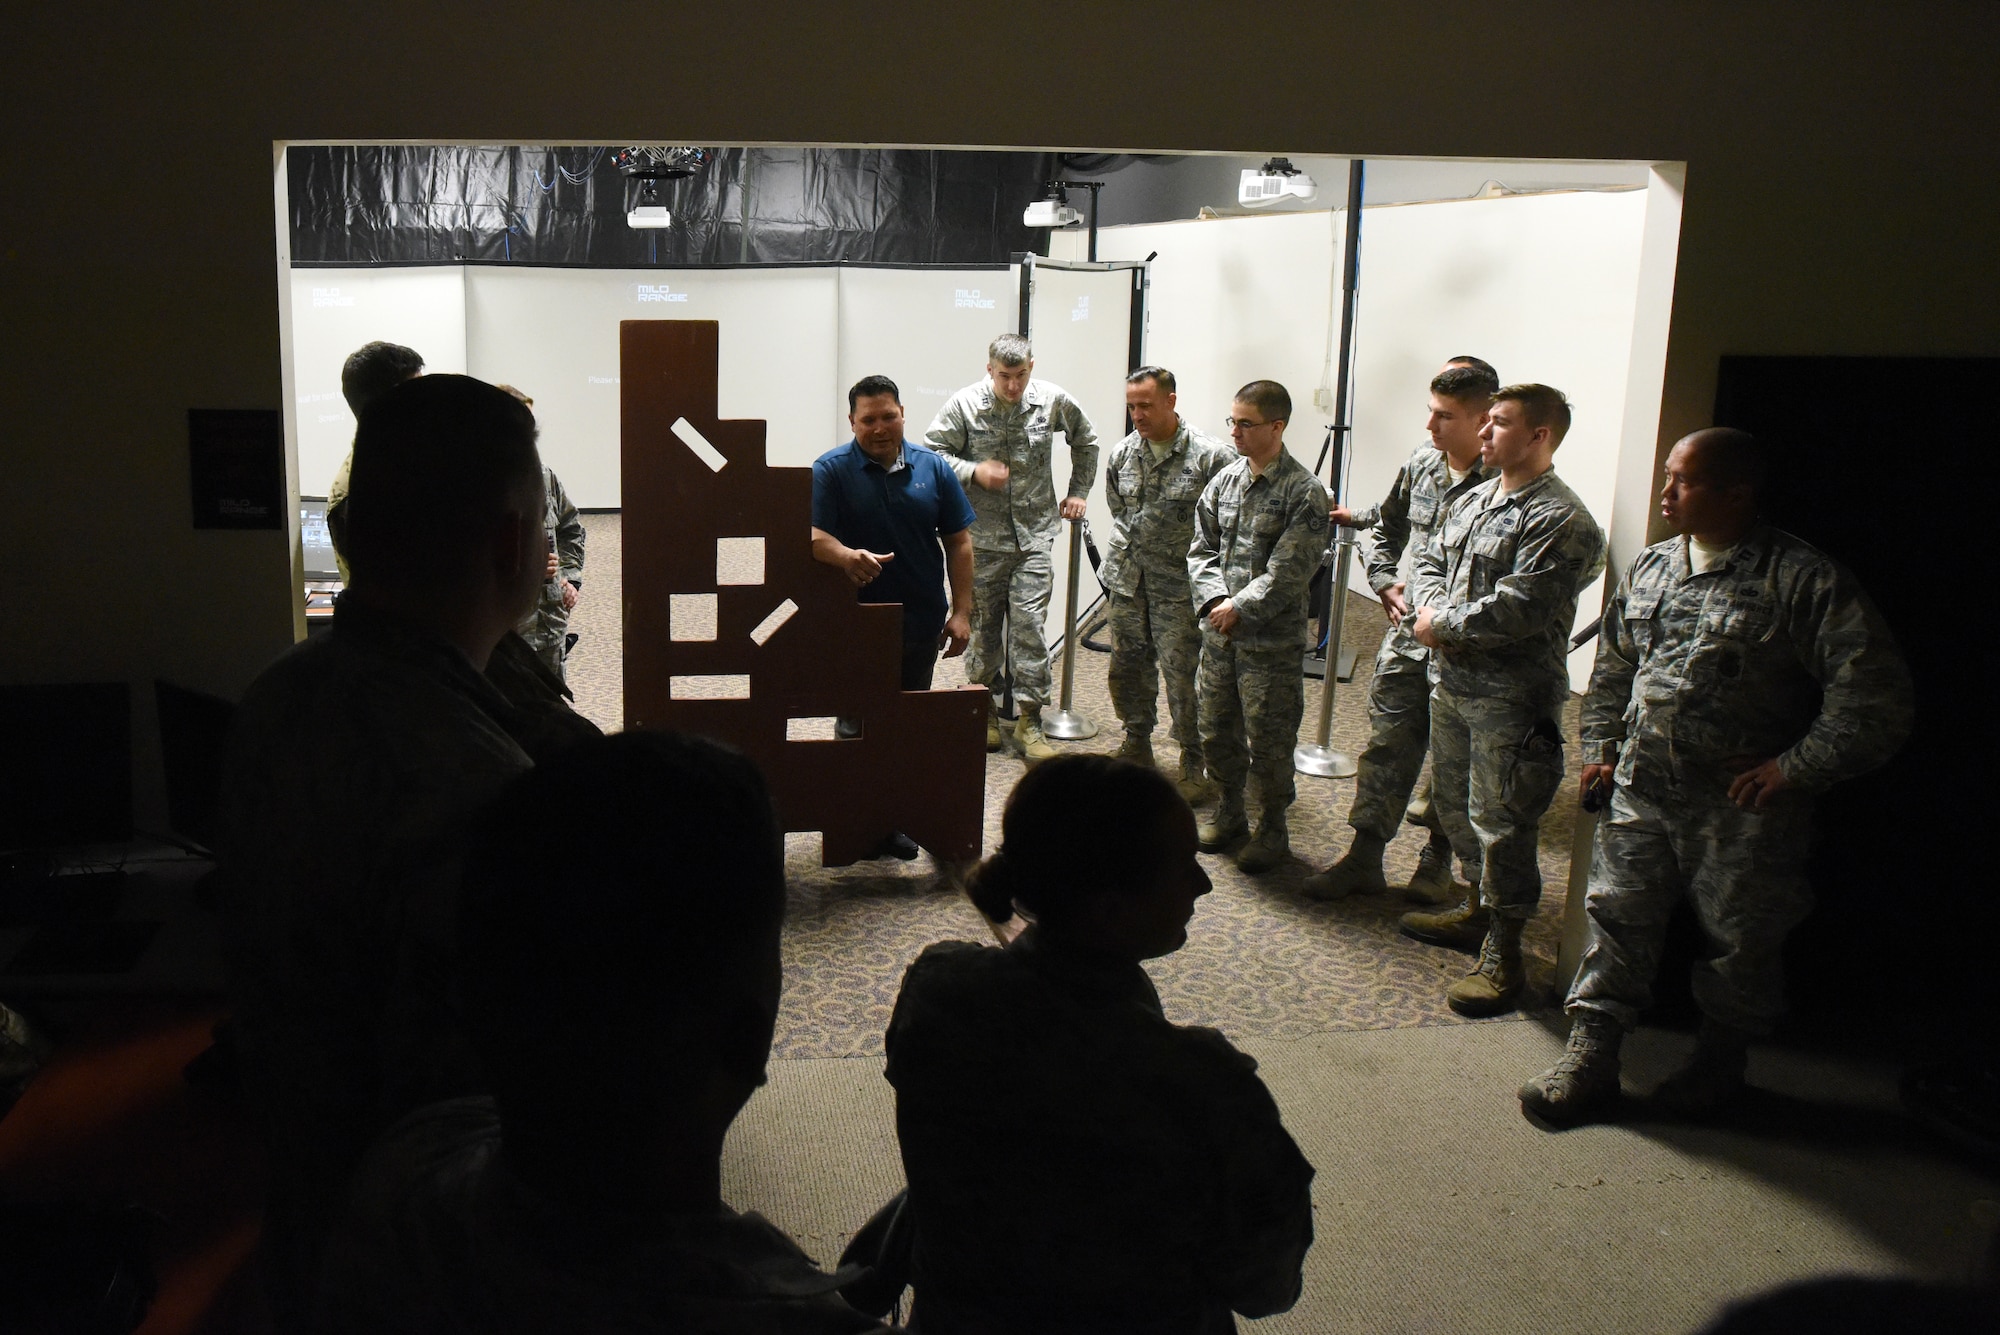 U.S. Air Force Master Sgt. Kaleo Vincente (center), 176th Security Forces Squadron (SFS) unit trainer gives directions to members of the North Carolina (NC) and Louisiana (LA) Air National Guard (ANG) as they prepare to conduct use of force and tactical situational practice in a Fire Arms Training Simulator simulator June 12, 2019 at the 176th SFS in Anchorage, AK. The 145th Security Forces and 263rd Combat Communications Squadrons with the NCANG, and the 159th Security Forces Squadron with the LANG travel to Joint Base Elmendorf-Richardson to train on various tactical and strategic law enforcement procedures during annual training.